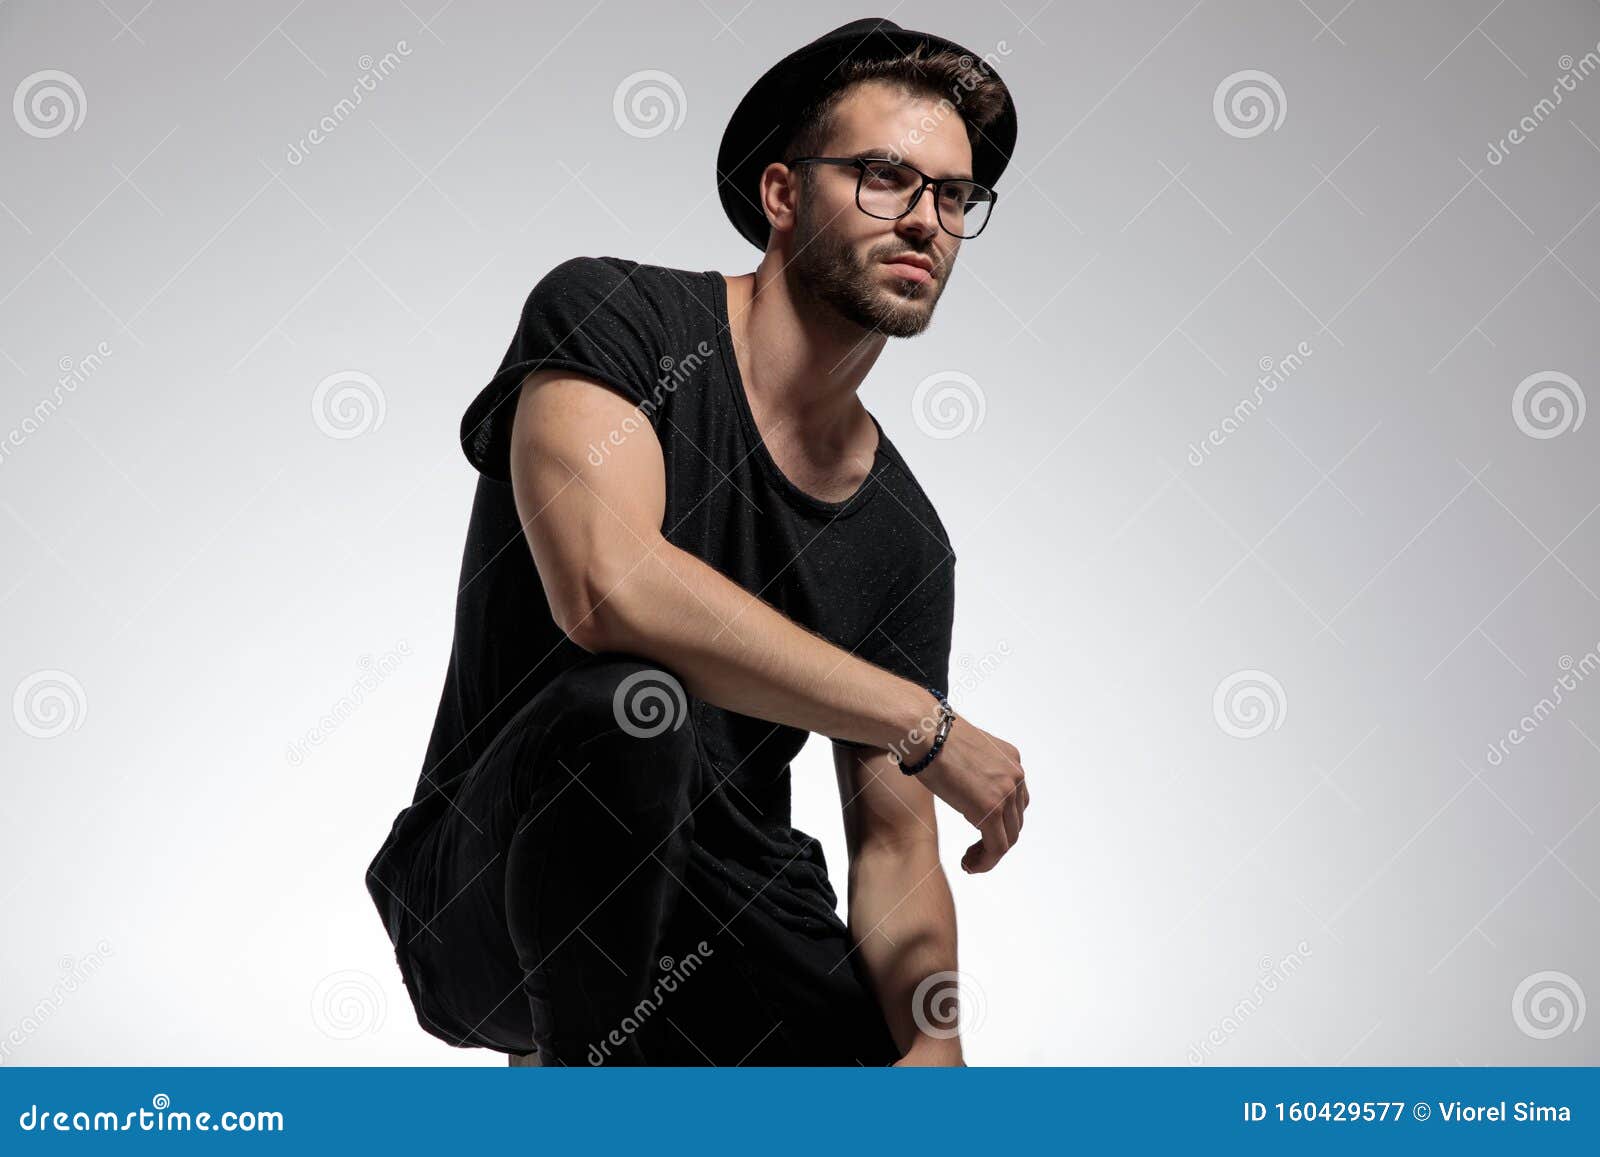 casual man standing crouched and looking away pensive